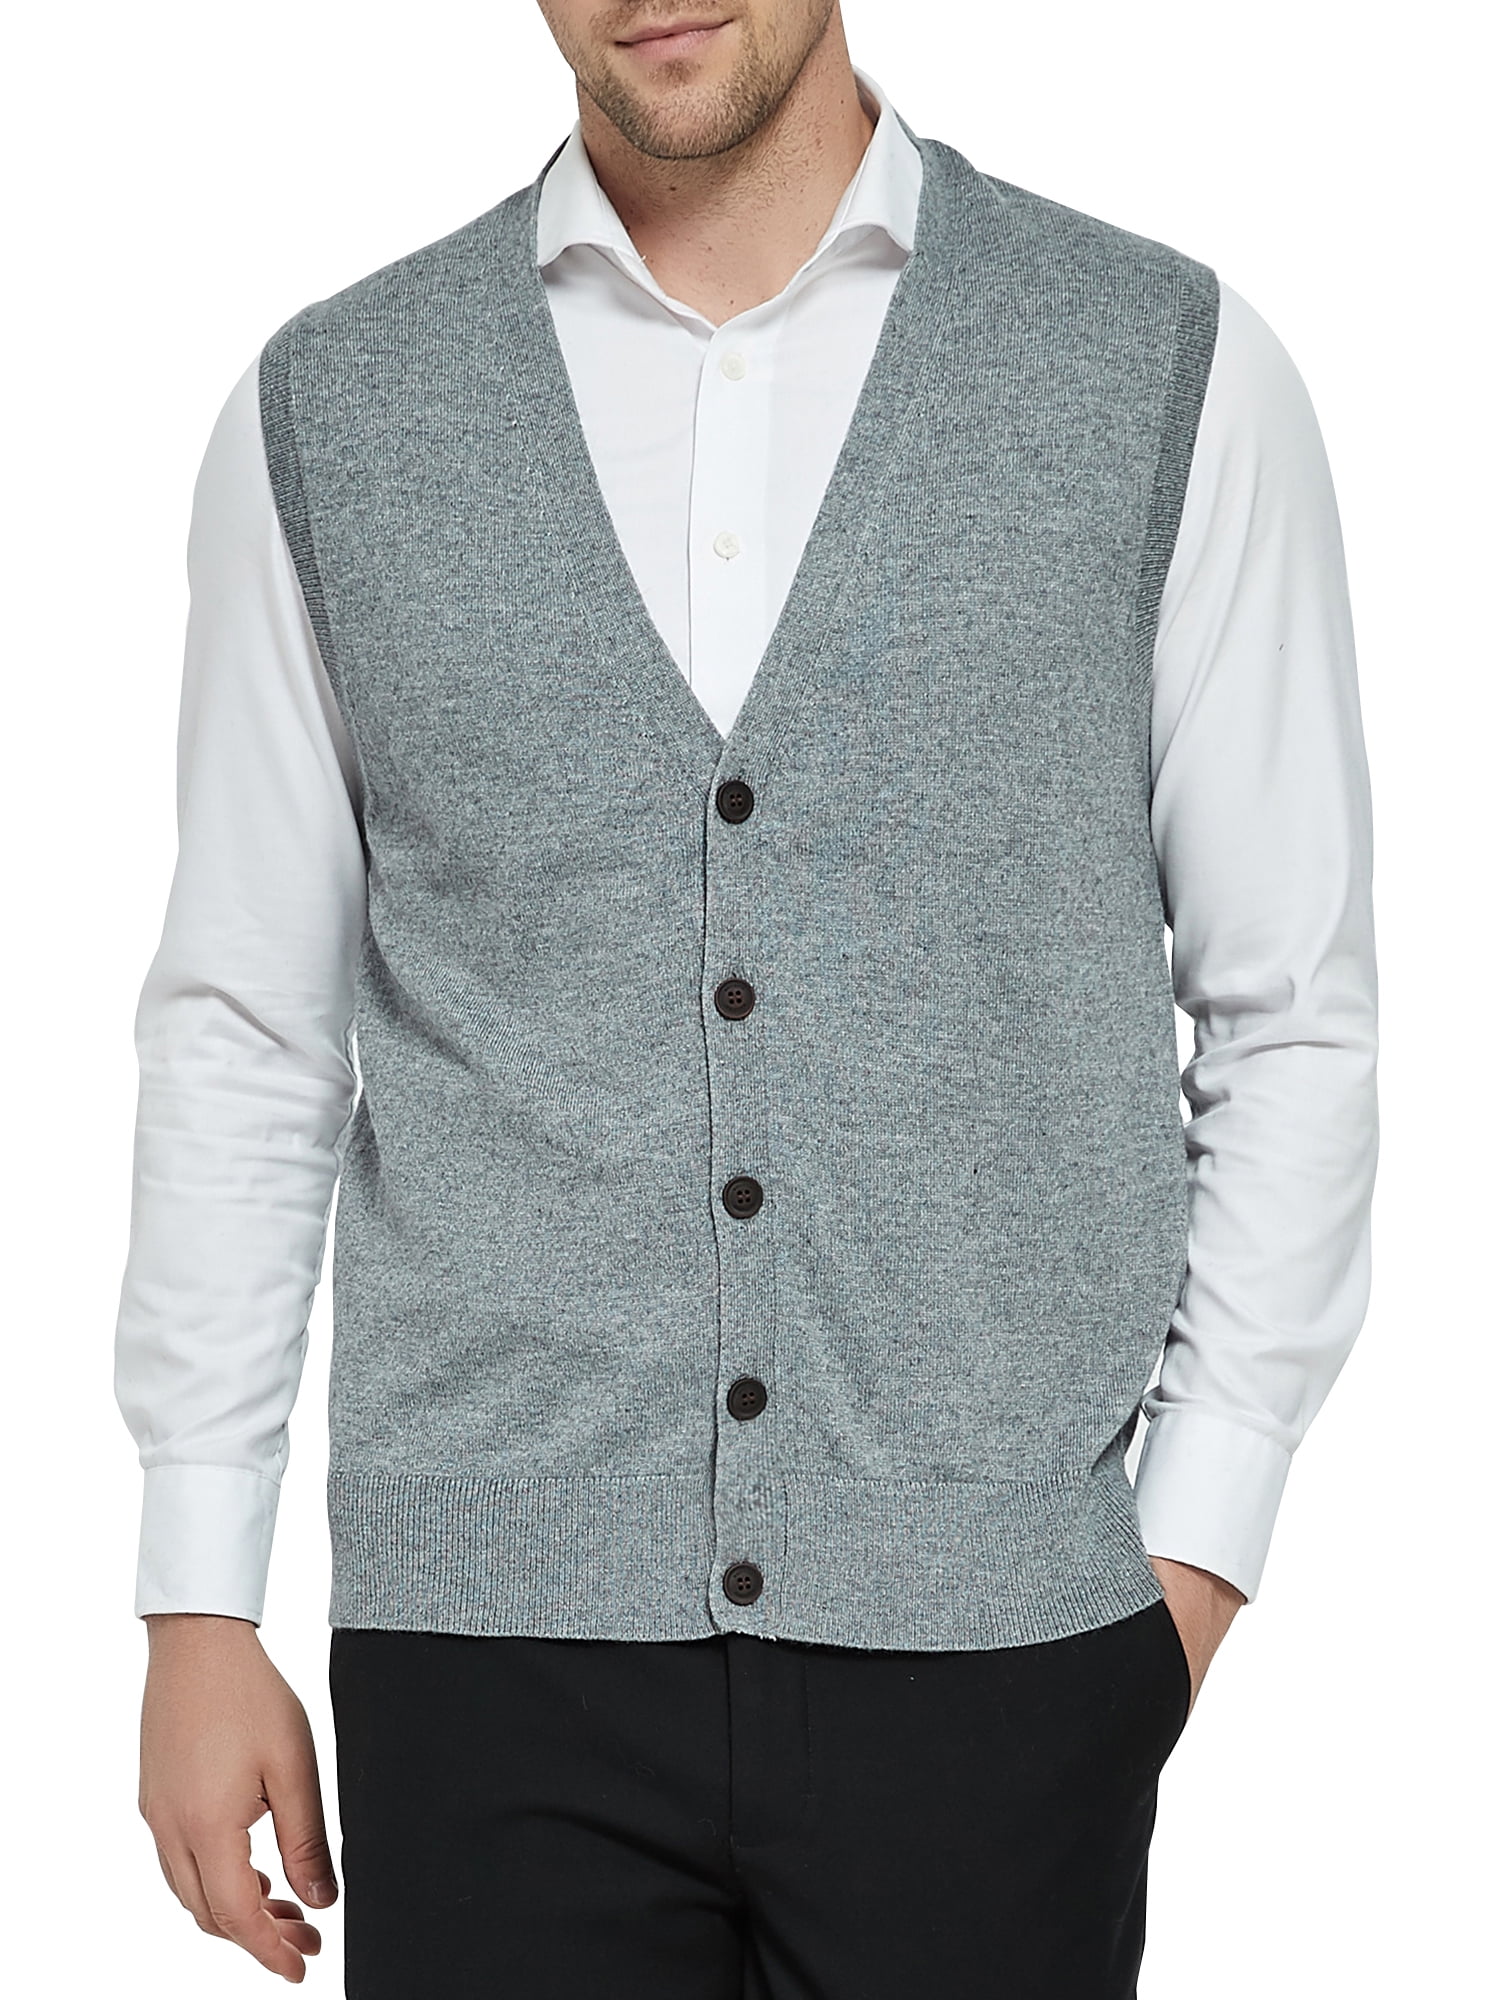 Mens Sweater Vest Cashmere Wool Blended V Neck Sleeveless Button Cardigan  Sweat⊹